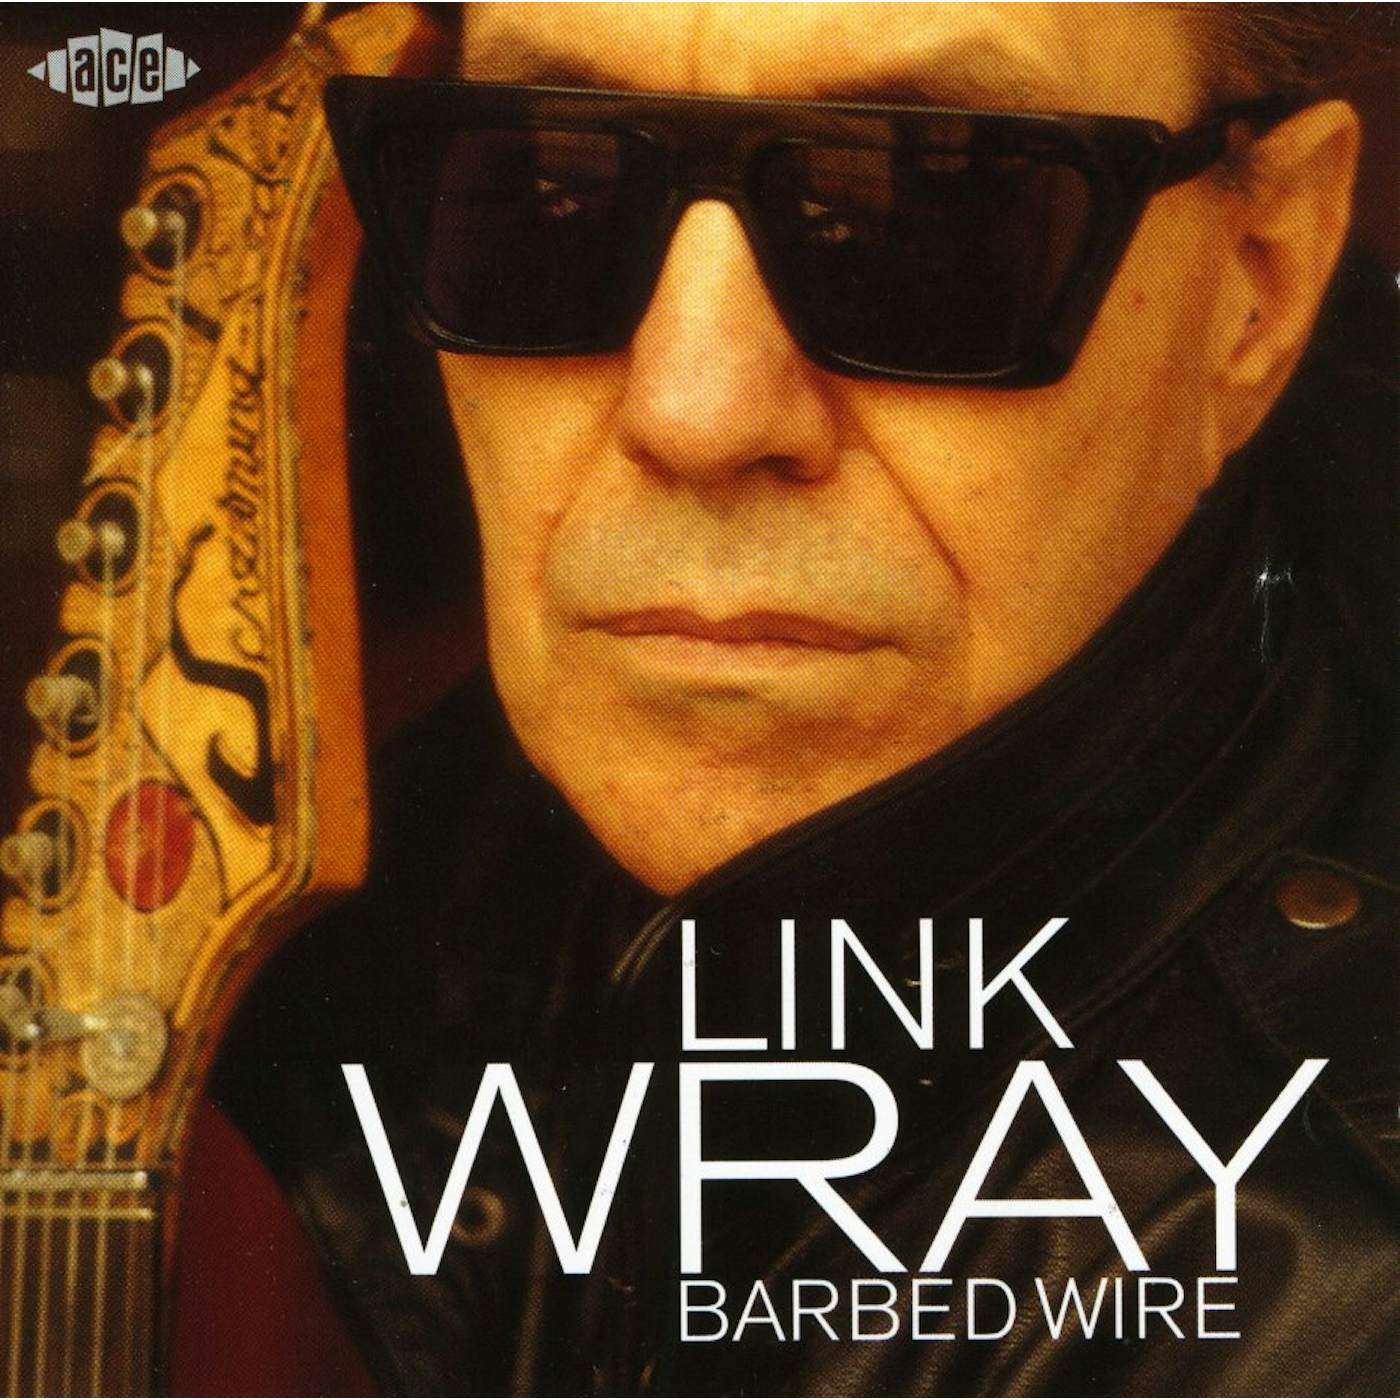 Link Wray BARBED WIRE CD